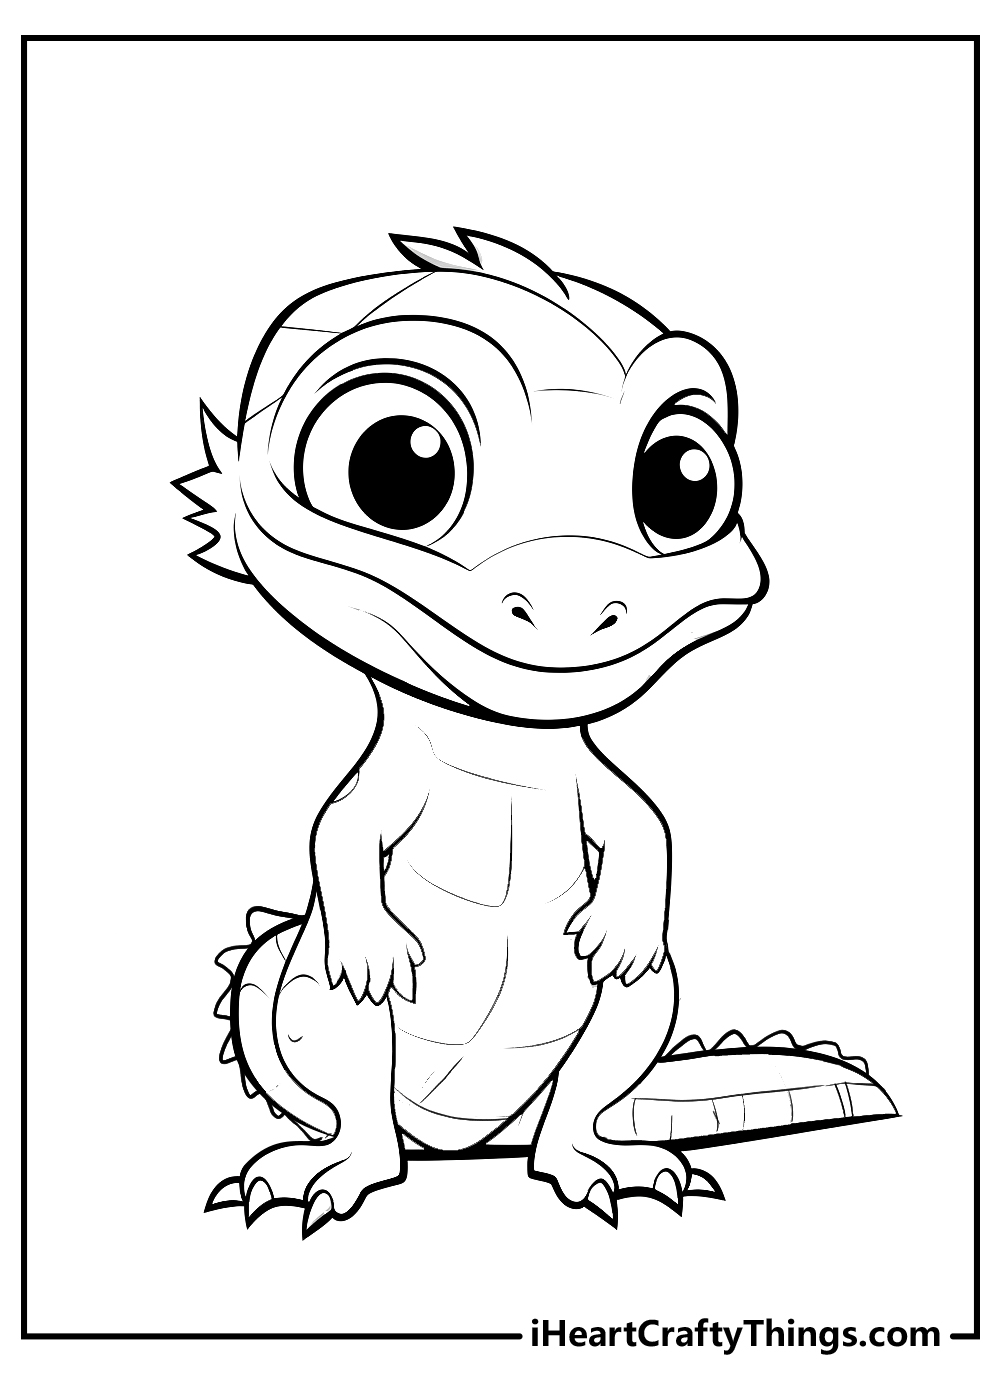 new lizard coloring pages